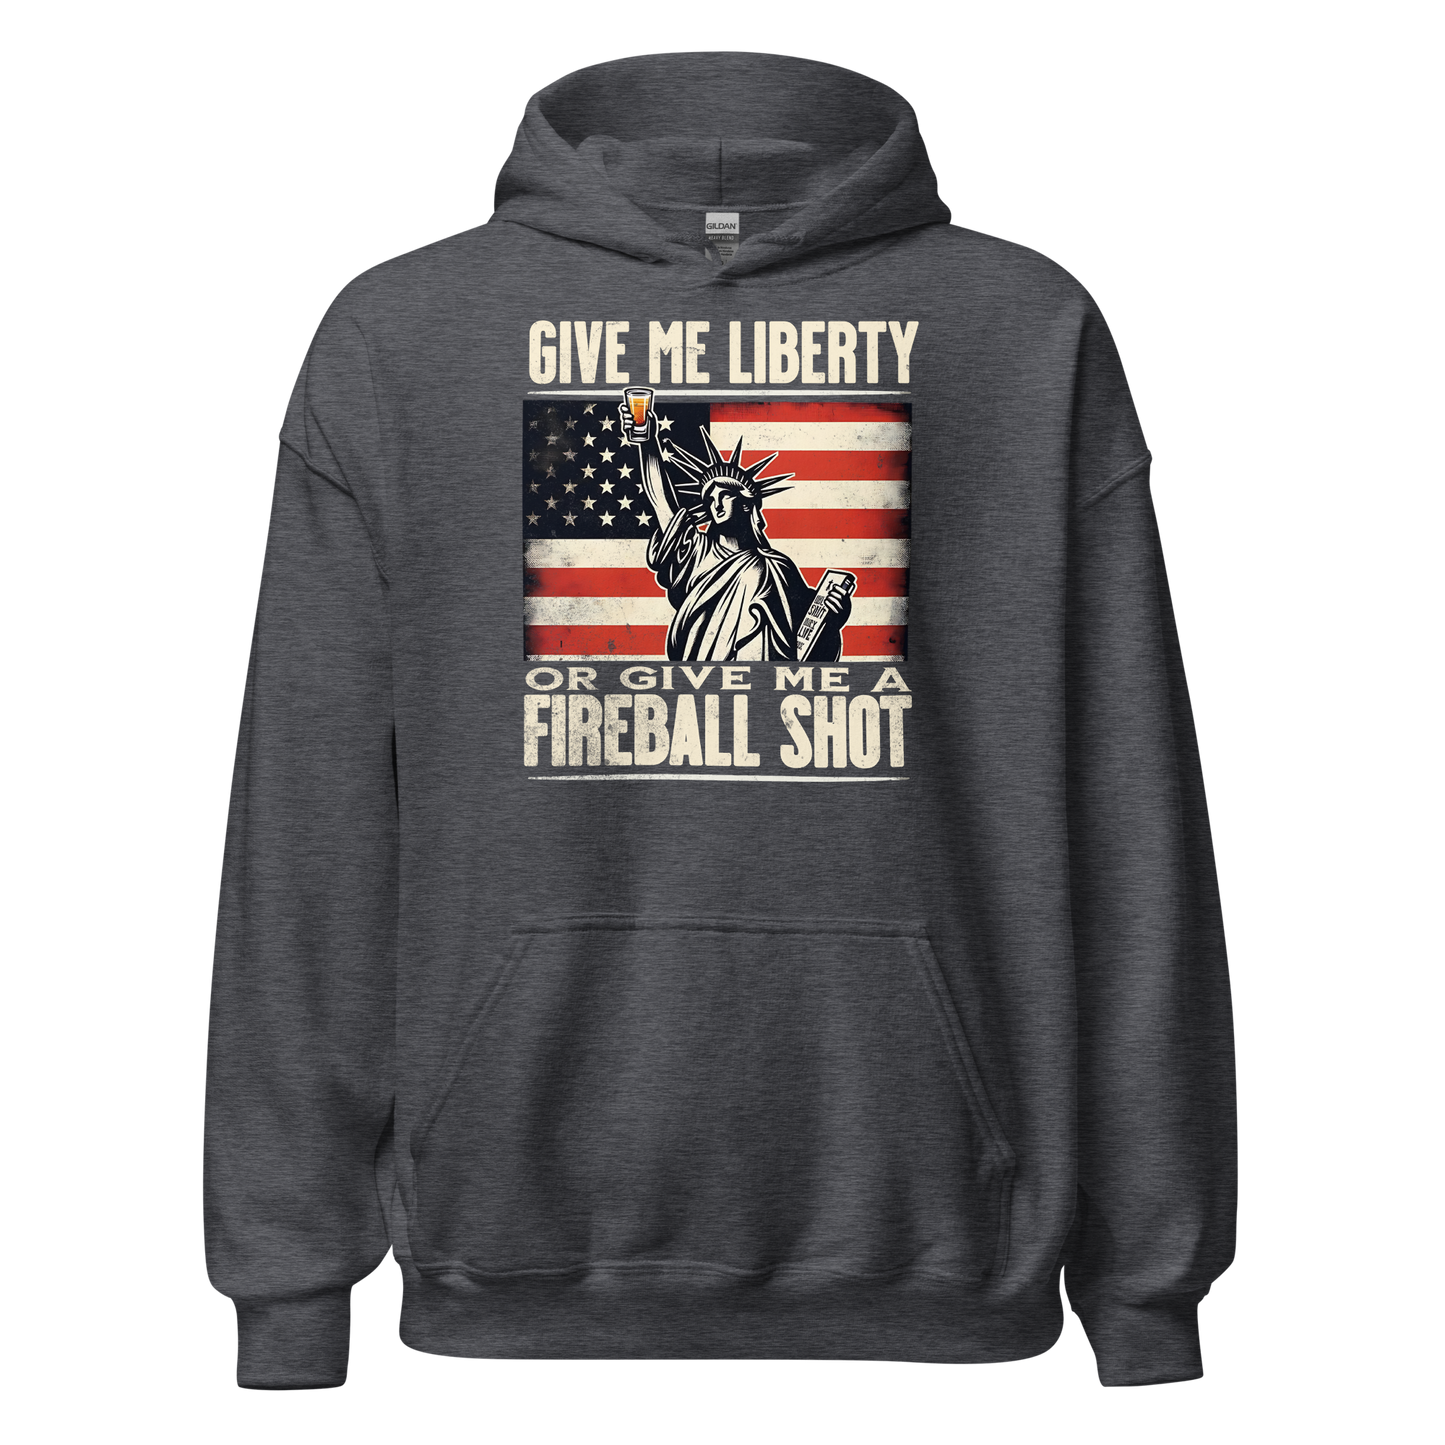 Hoodie with 'Give Me Liberty or Give Me a Fireball Shot' text, Statue of Liberty holding a shot glass, and distressed American flag background. Perfect for 4th of July.